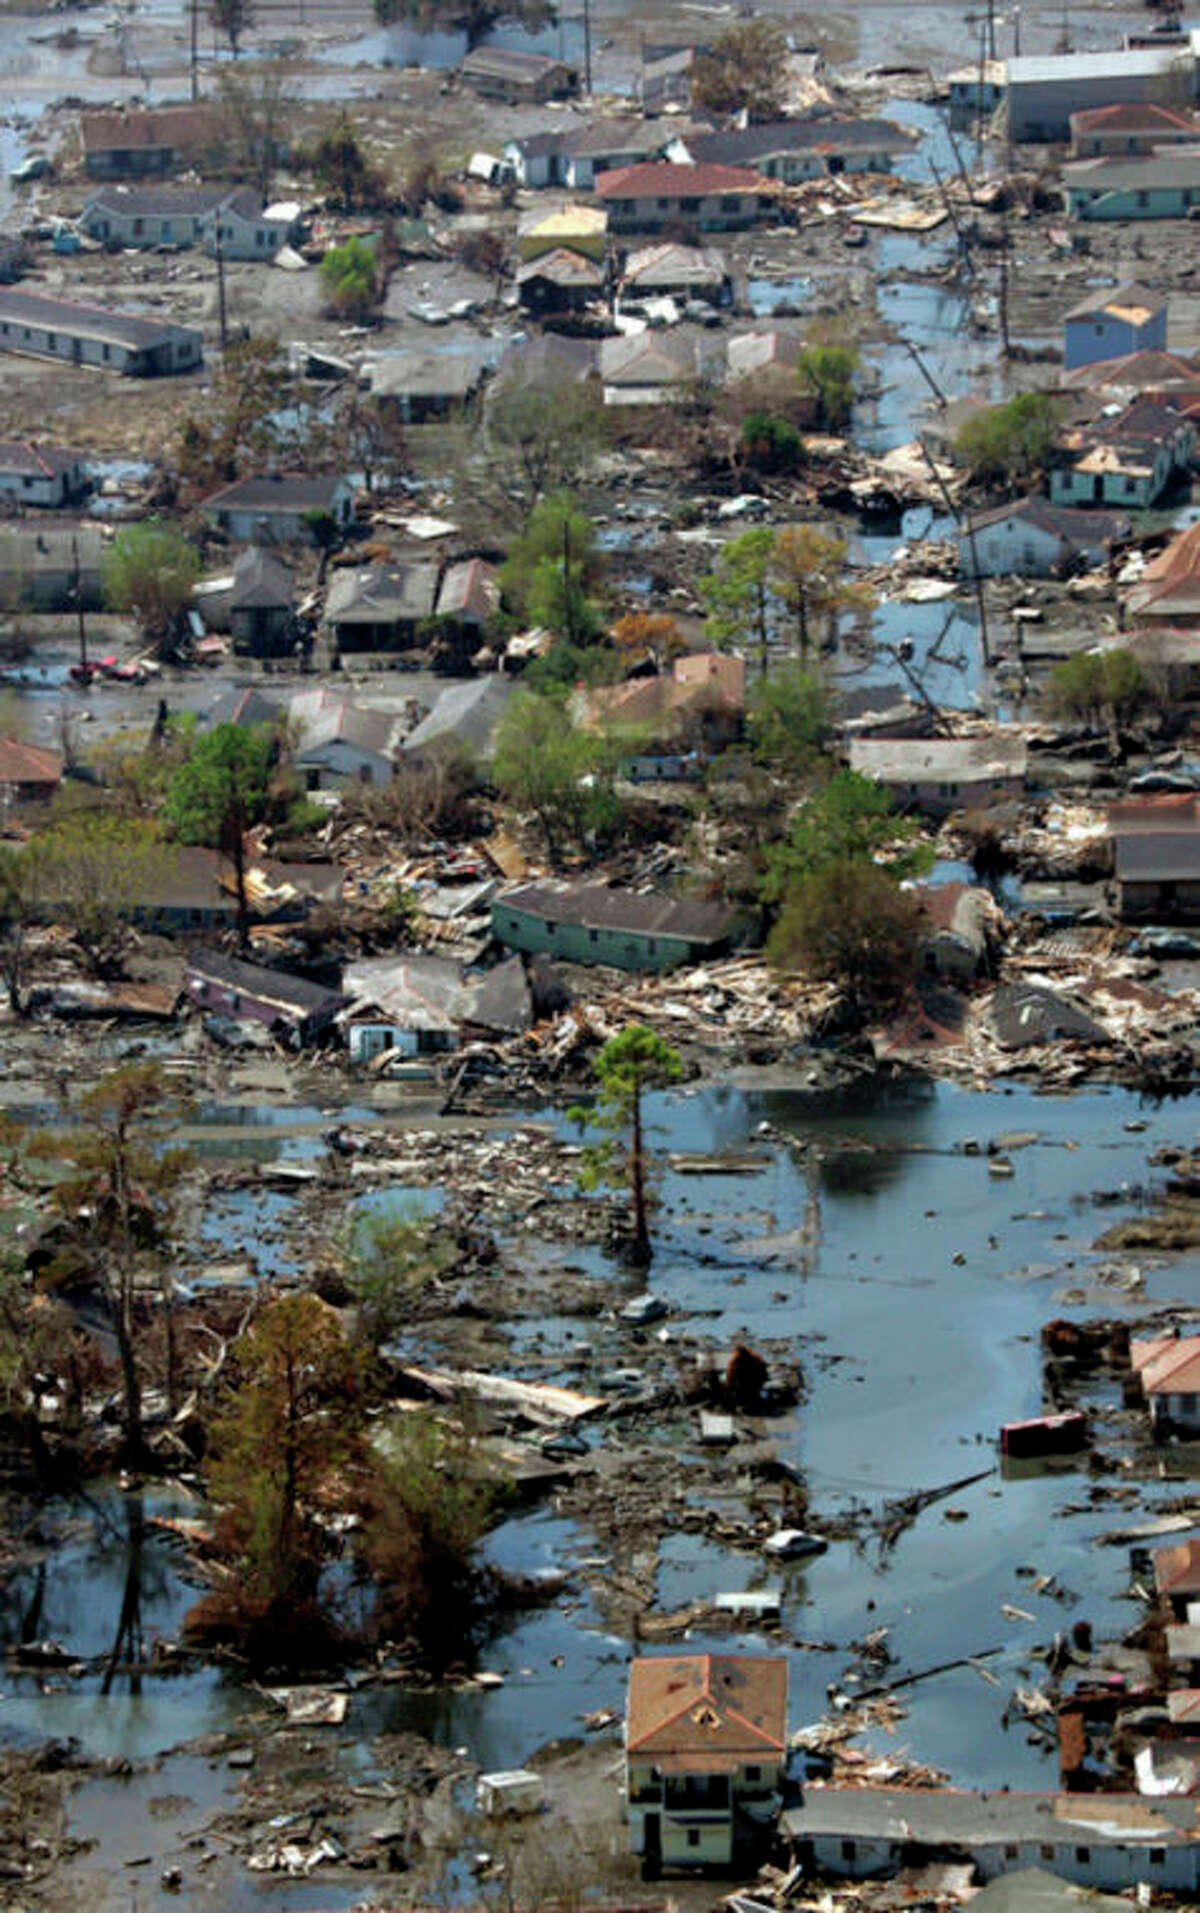 FILE - This Sept. 11, 2005 file photo shows a neighborhood destroyed by Hurricane Katrina in New Orleans. Inspectors taking the first-ever inventory of flood control systems overseen by the federal government have found hundreds of structures at risk of failing and endangering people and property in 35 states. Levees deemed in unacceptable condition span the breadth of America. They are in every region, in cities and towns big and small. (AP Photo/David J. Phillip, File)